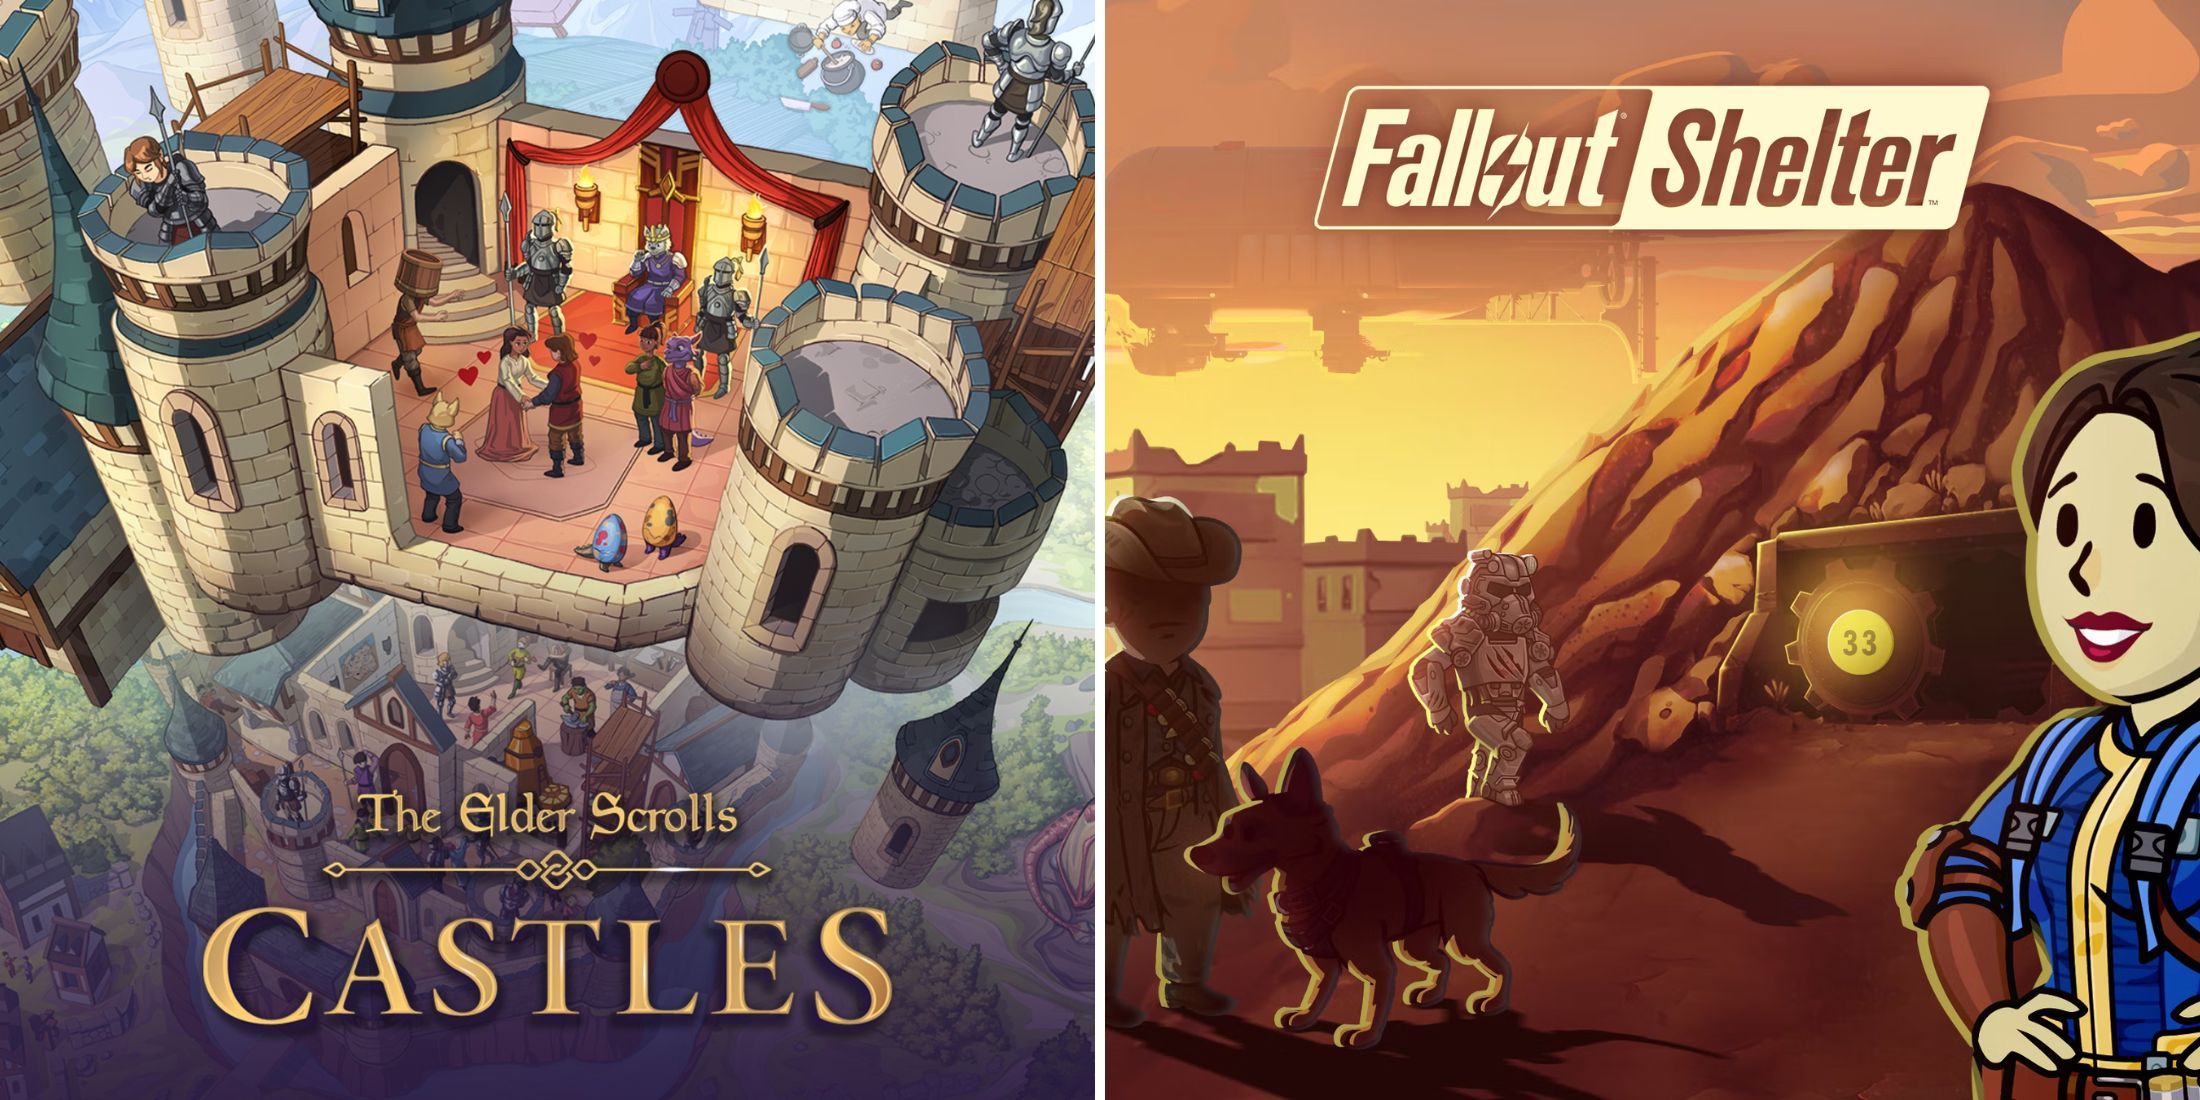 The Elder Scrolls: Castles and Fallout Shelter Official Cover Art